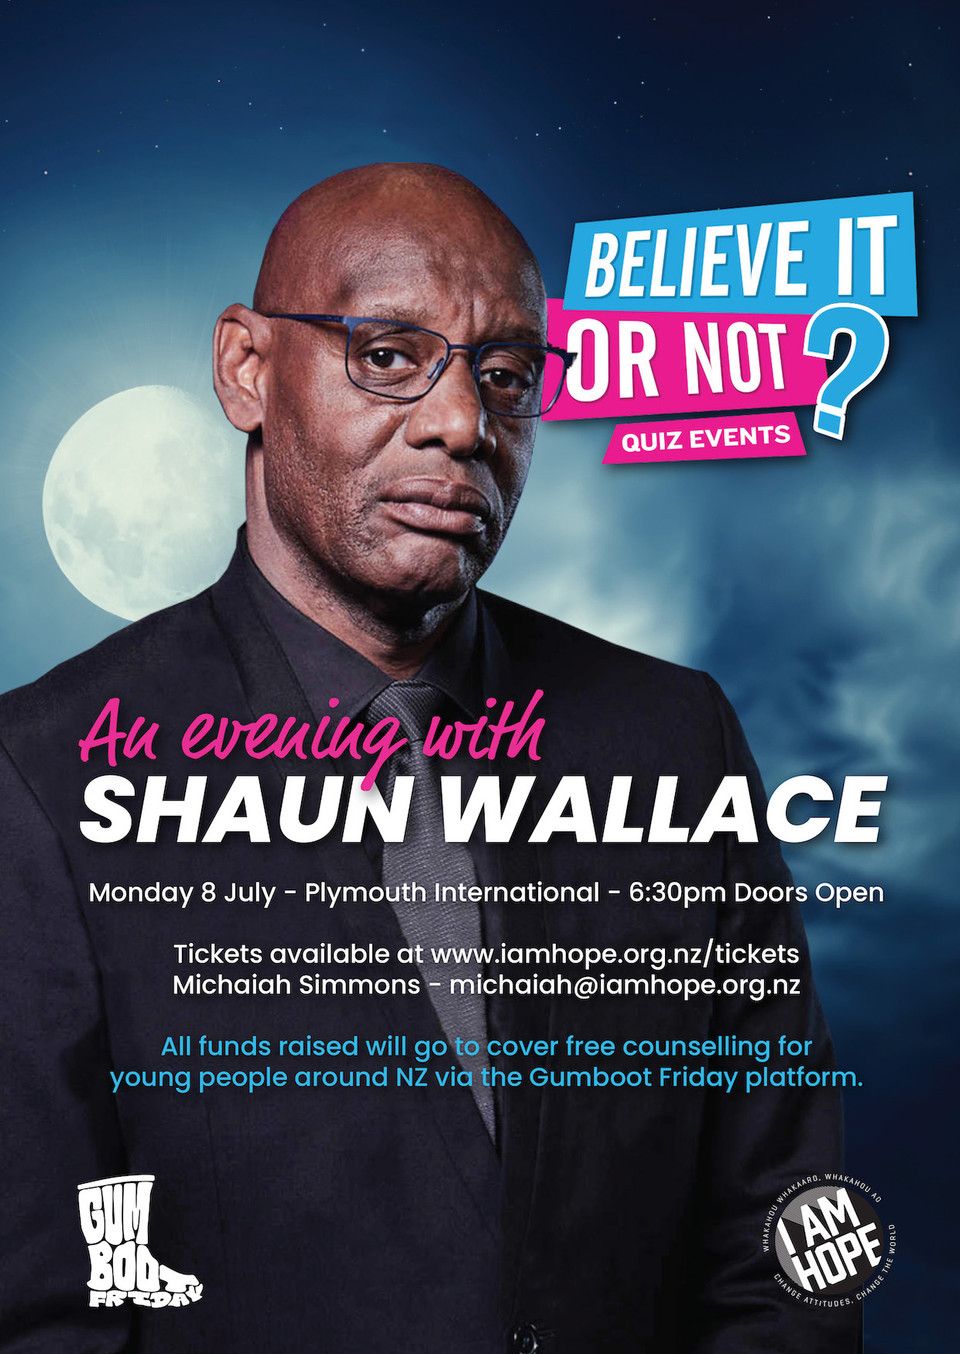 An evening with Shaun Wallace - The Dark Destroyer off The Chase